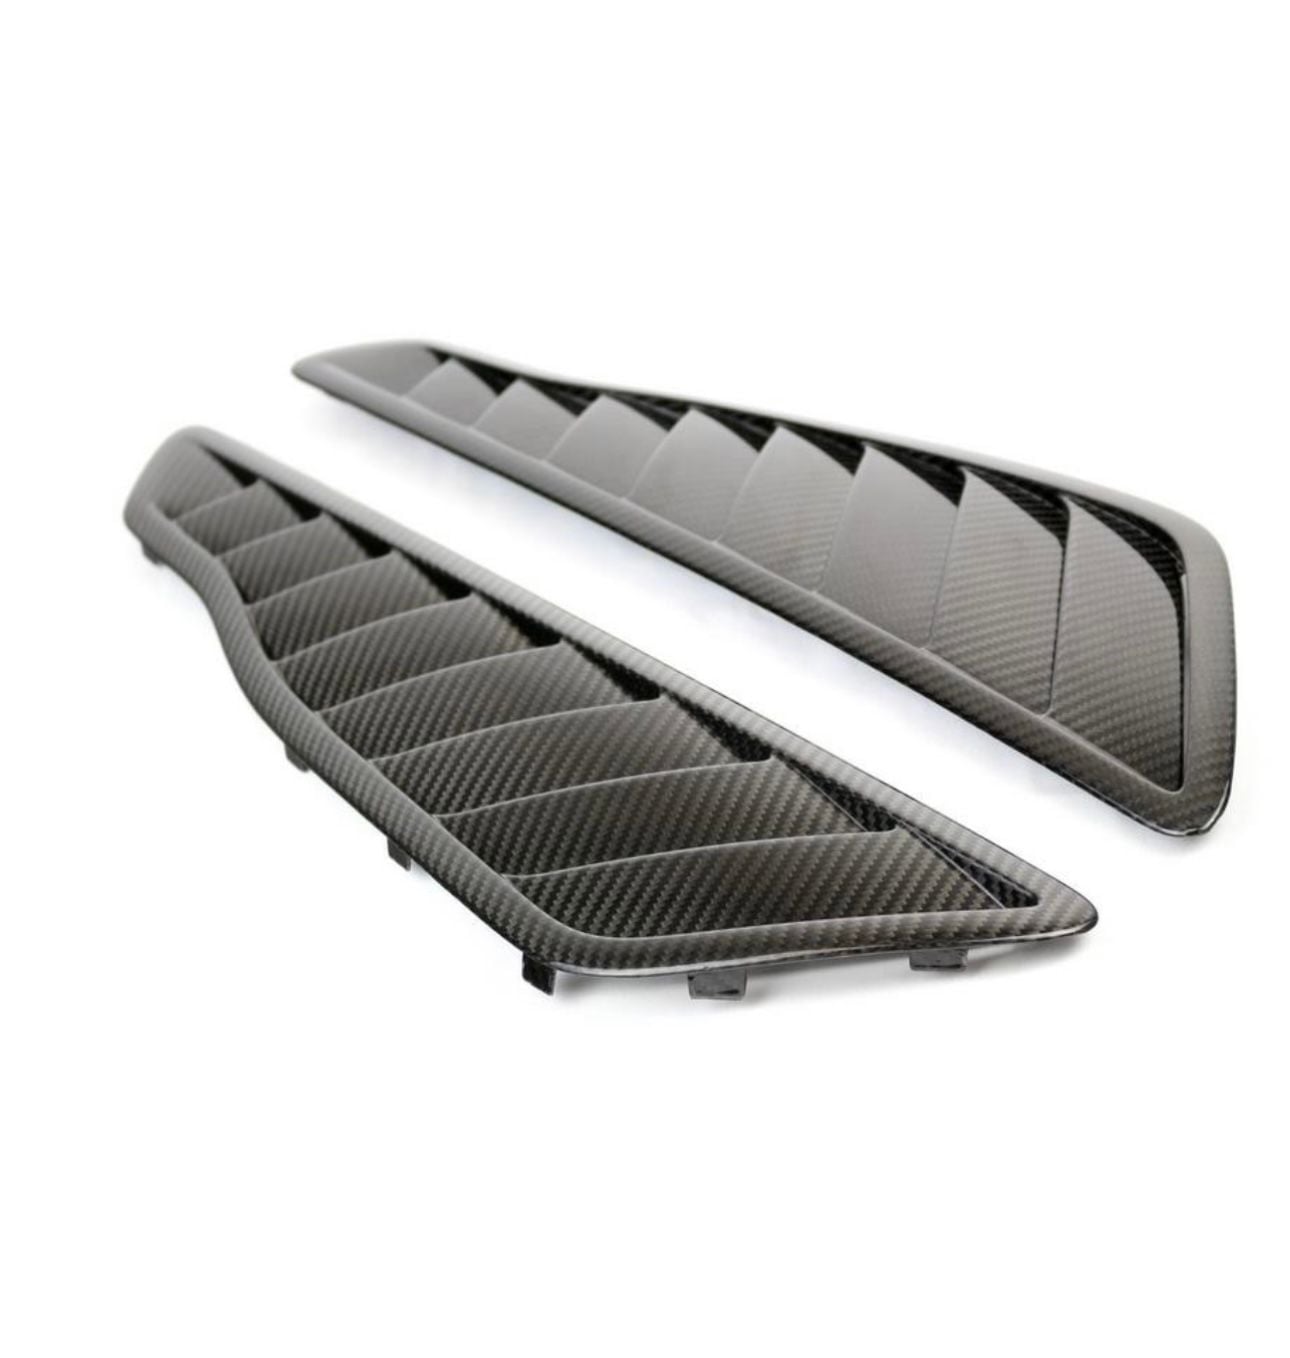 Miscellaneous - AMG GTR / GTR PRO Fender Vents - Carbon Fiber - New - 2018 to 2024 Mercedes-Benz AMG GT R Pro - Noblesville, IN 46062, United States